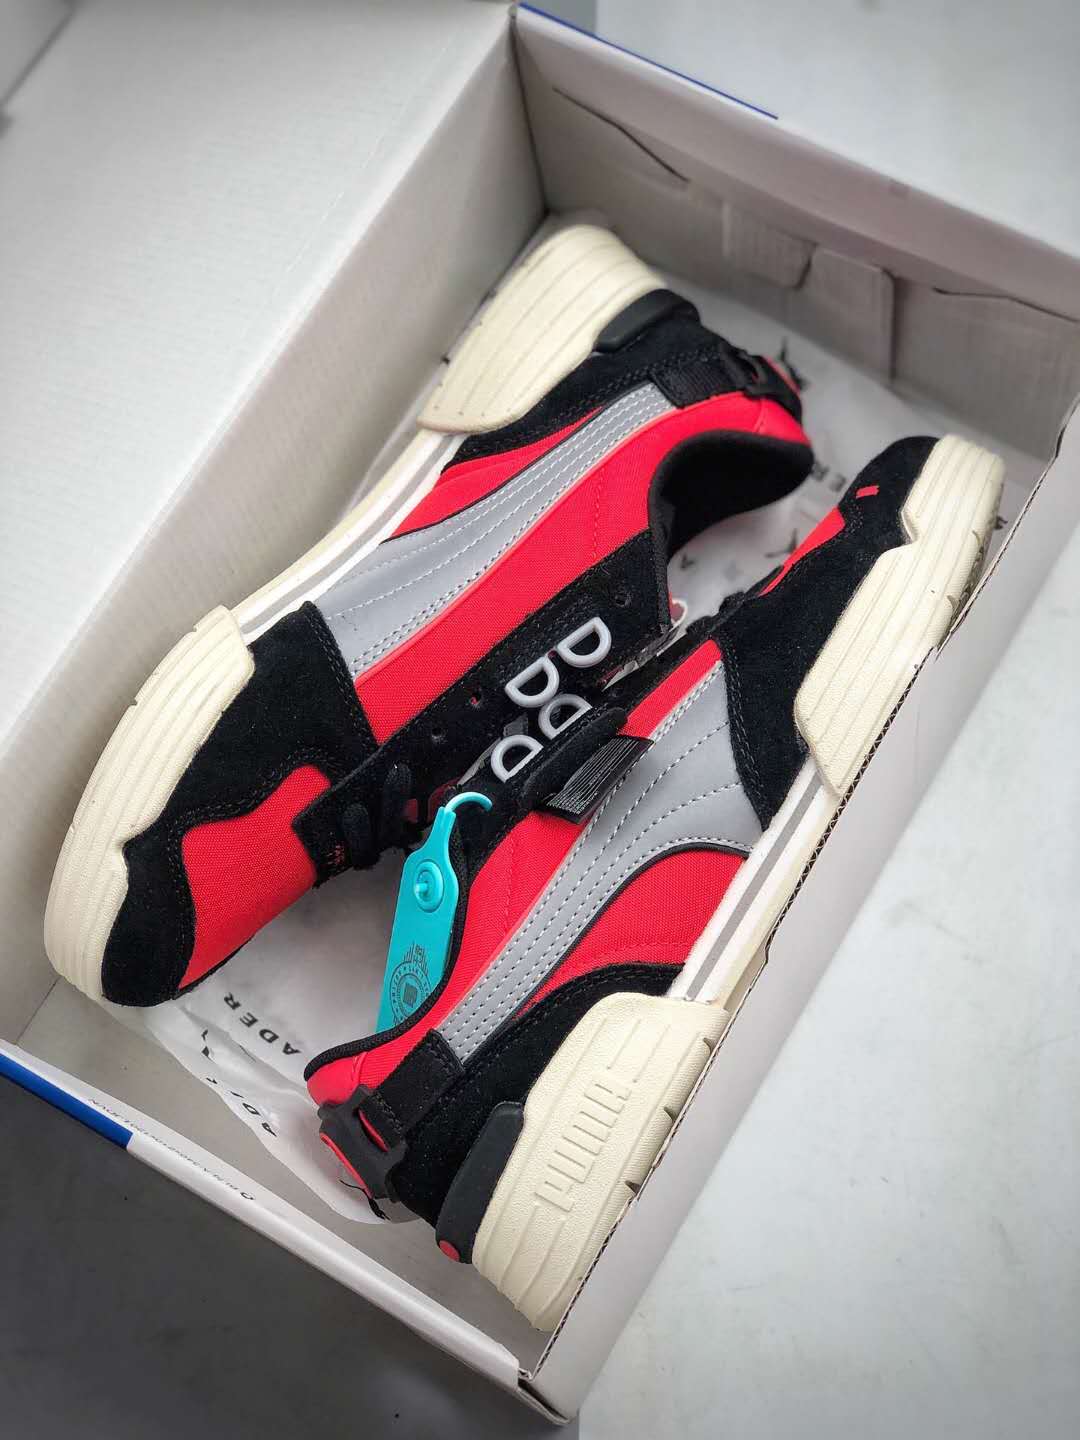 OG ADER Error x Puma CGR Trainers FT3 Whisper White - Limited Edition Collaborative Sneakers